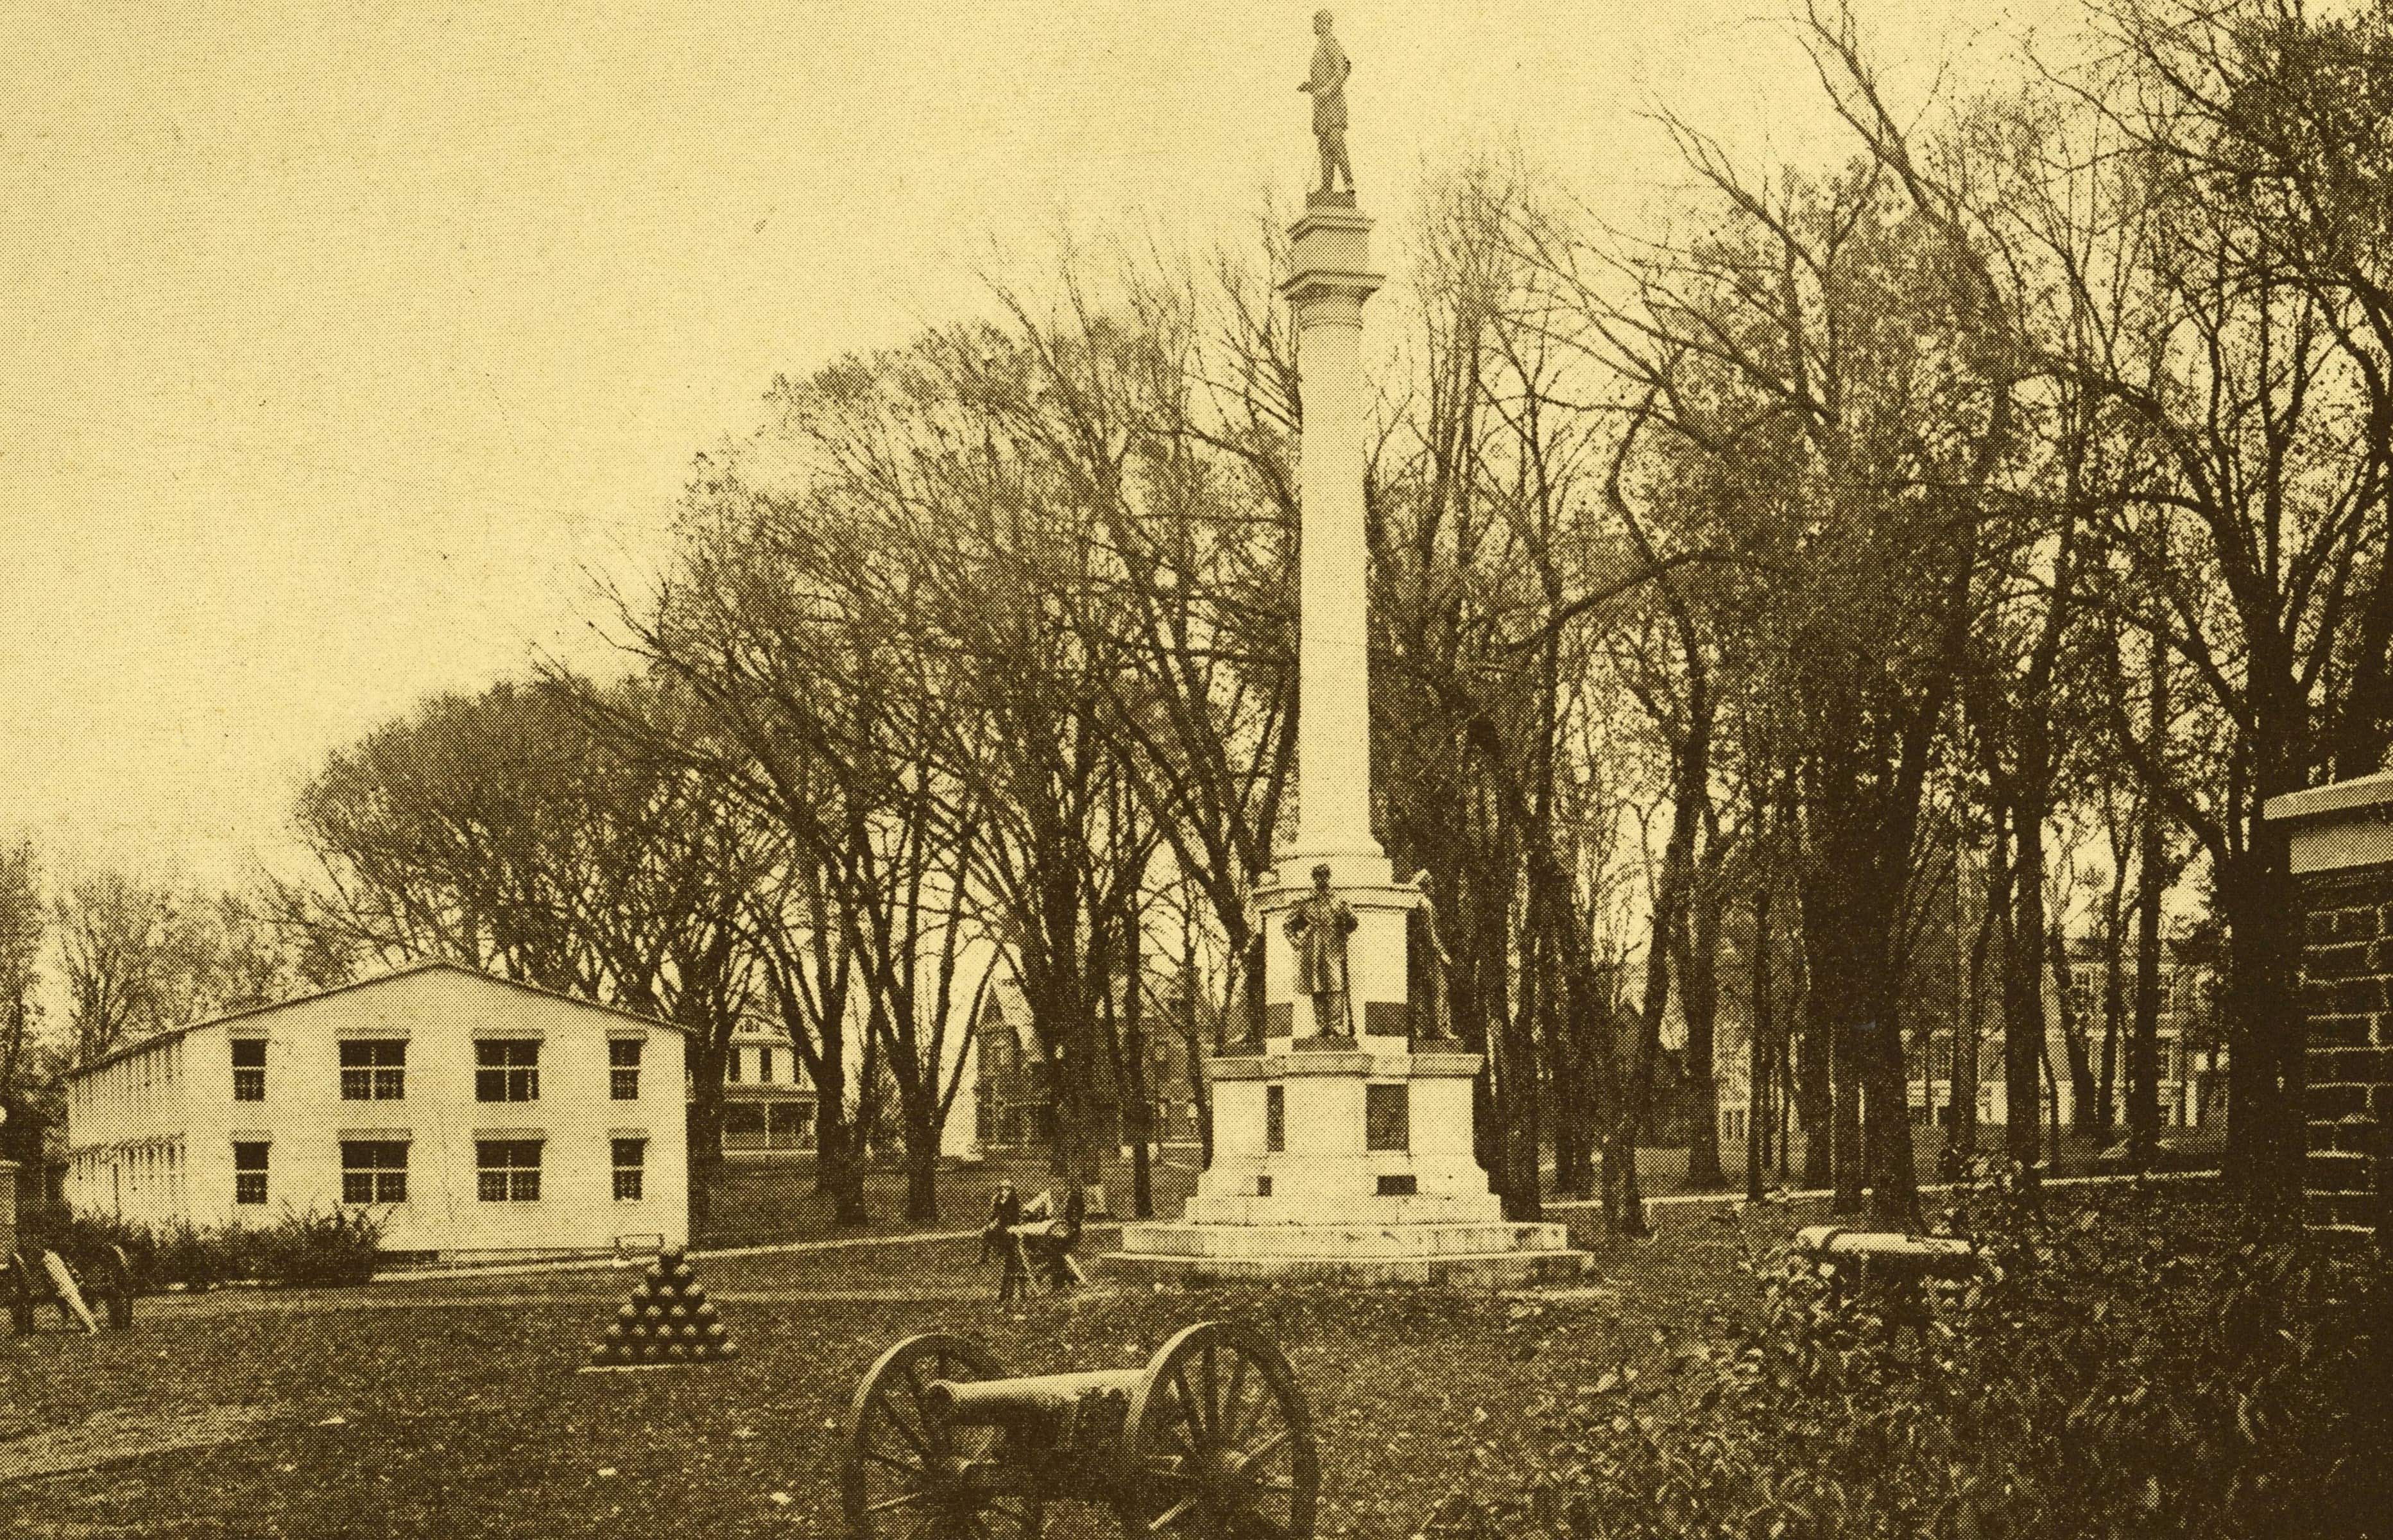 Wooden barracks were installed behind the monument in the late 19-teens. Student trainees in the Student Army Training Corps and Student Navy Training Corps were housed in the barracks and in nearby Howard Hall. Photo courtesy the Mahn Center for Archives & Special Collections